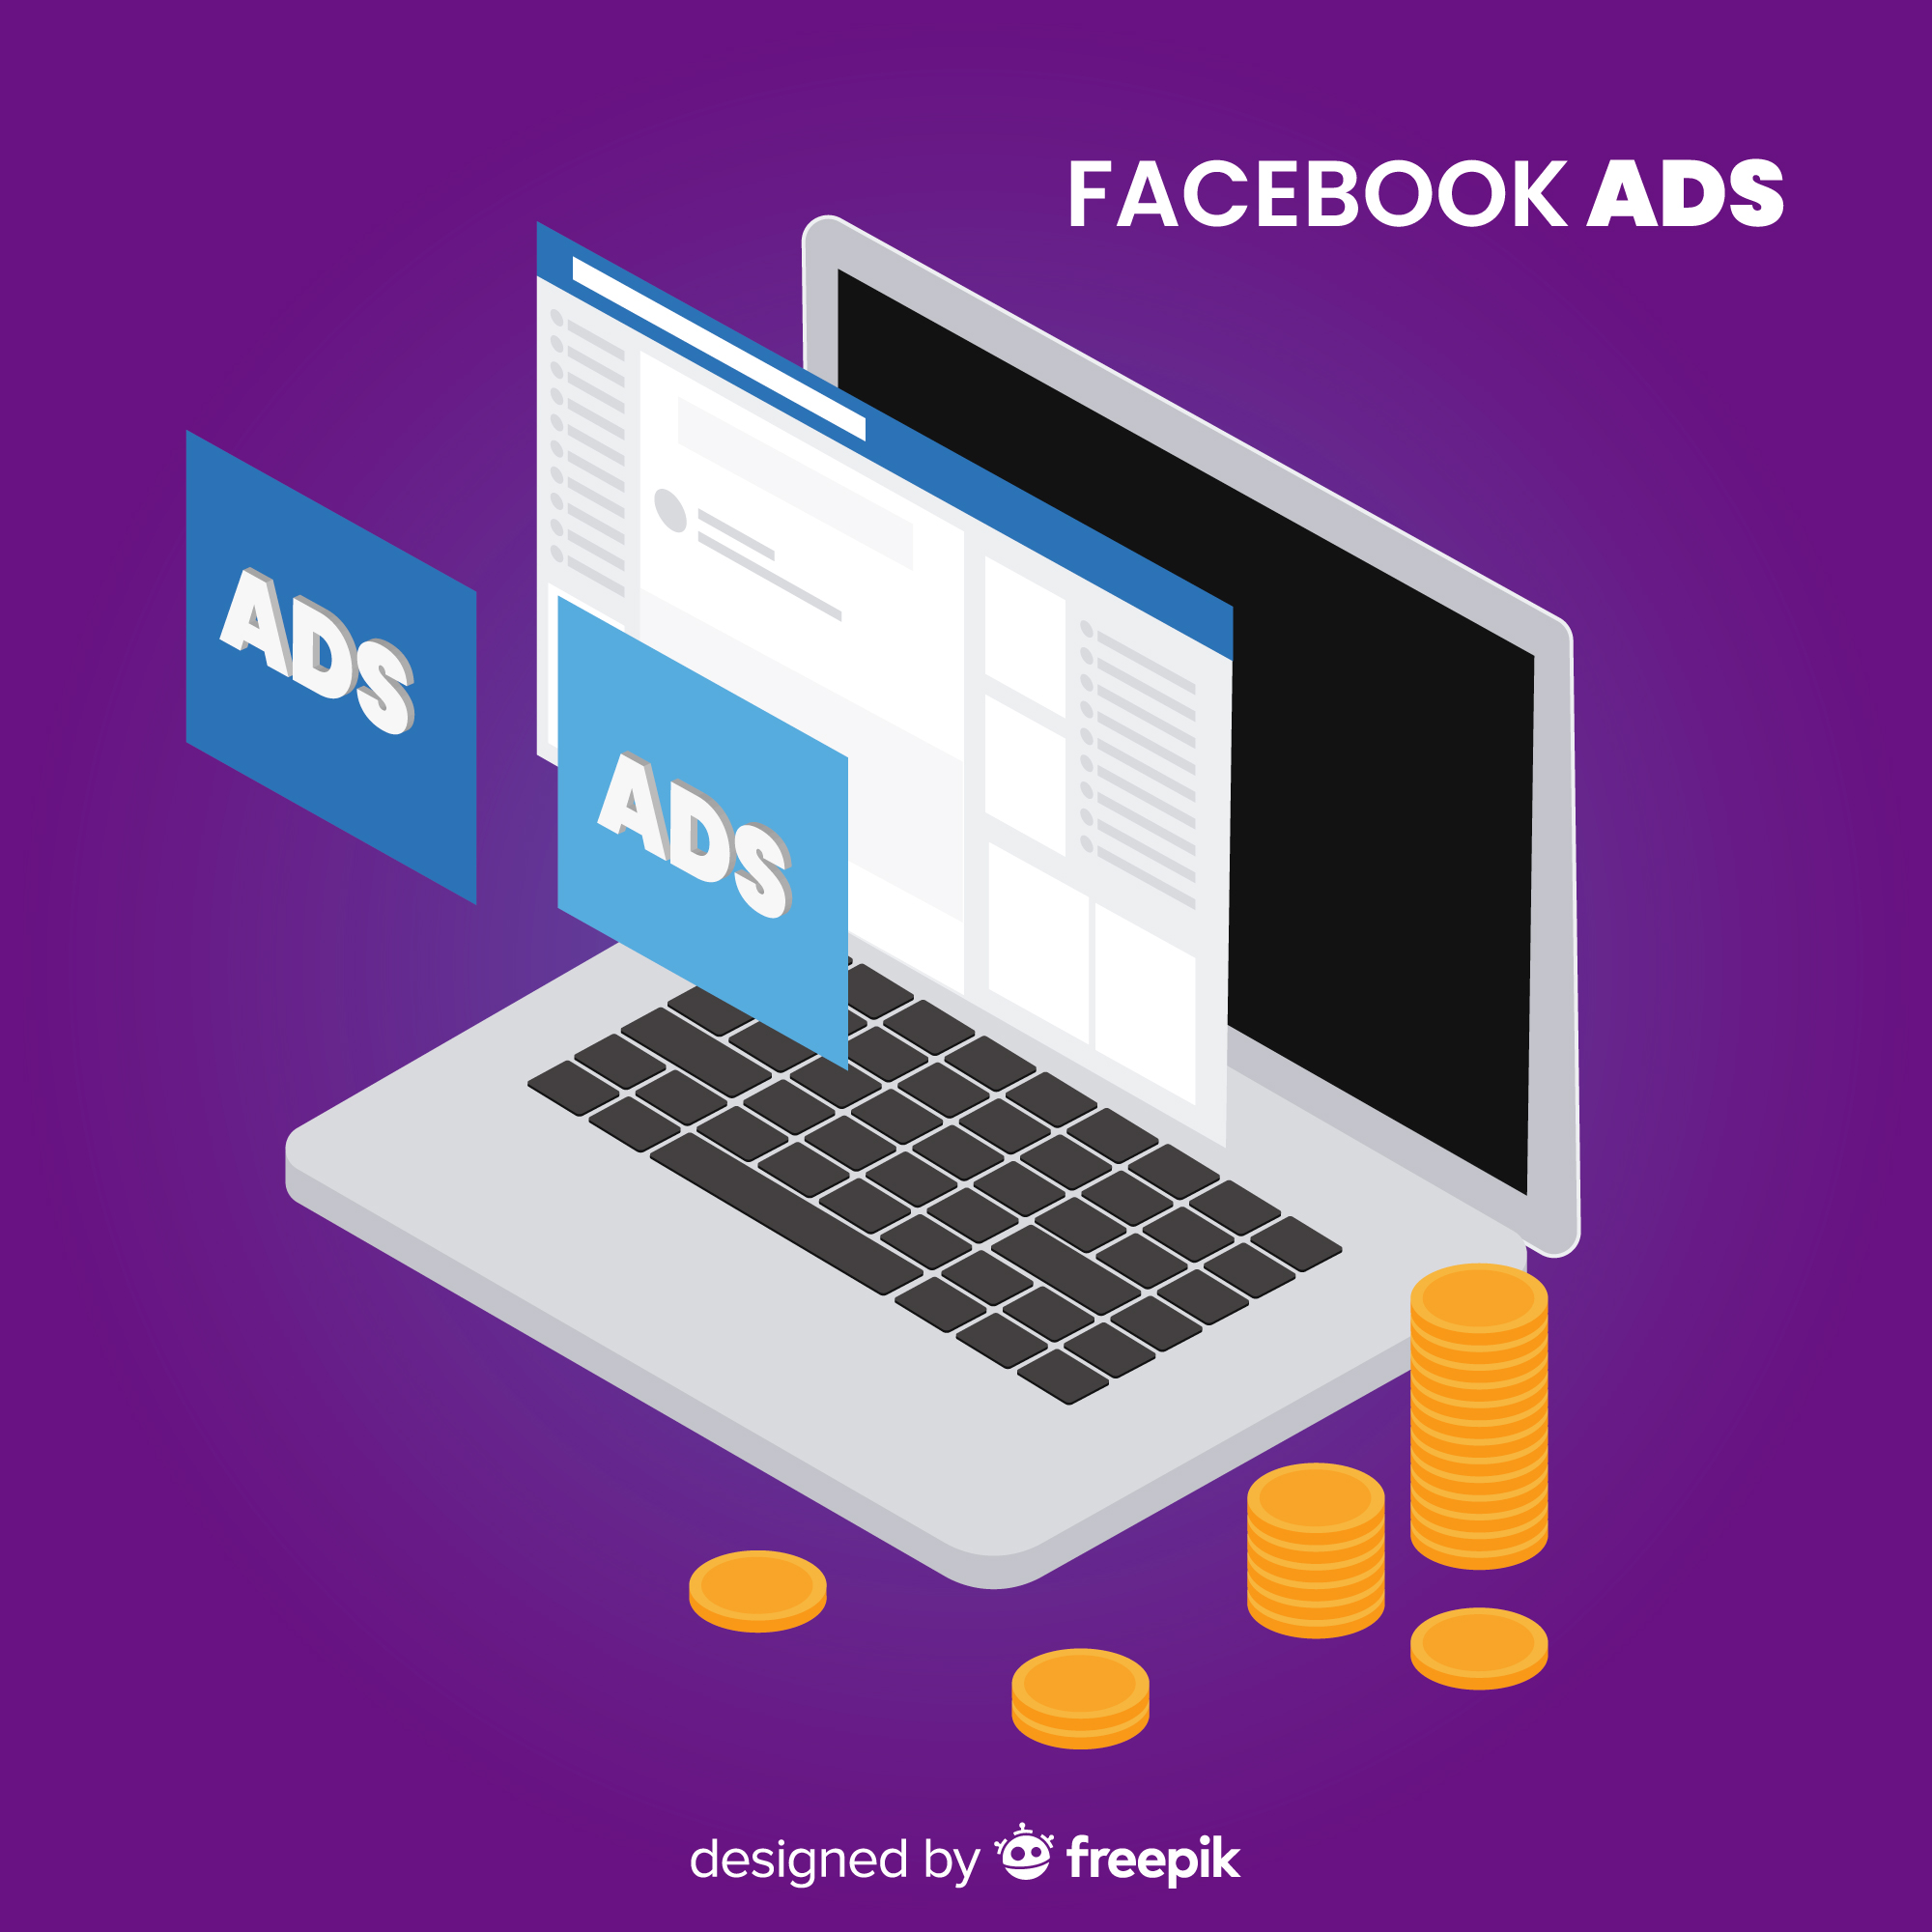 7 Quick Tips on How to Analyze Facebook Ads Laptop Showing Facebook Ads With Coins